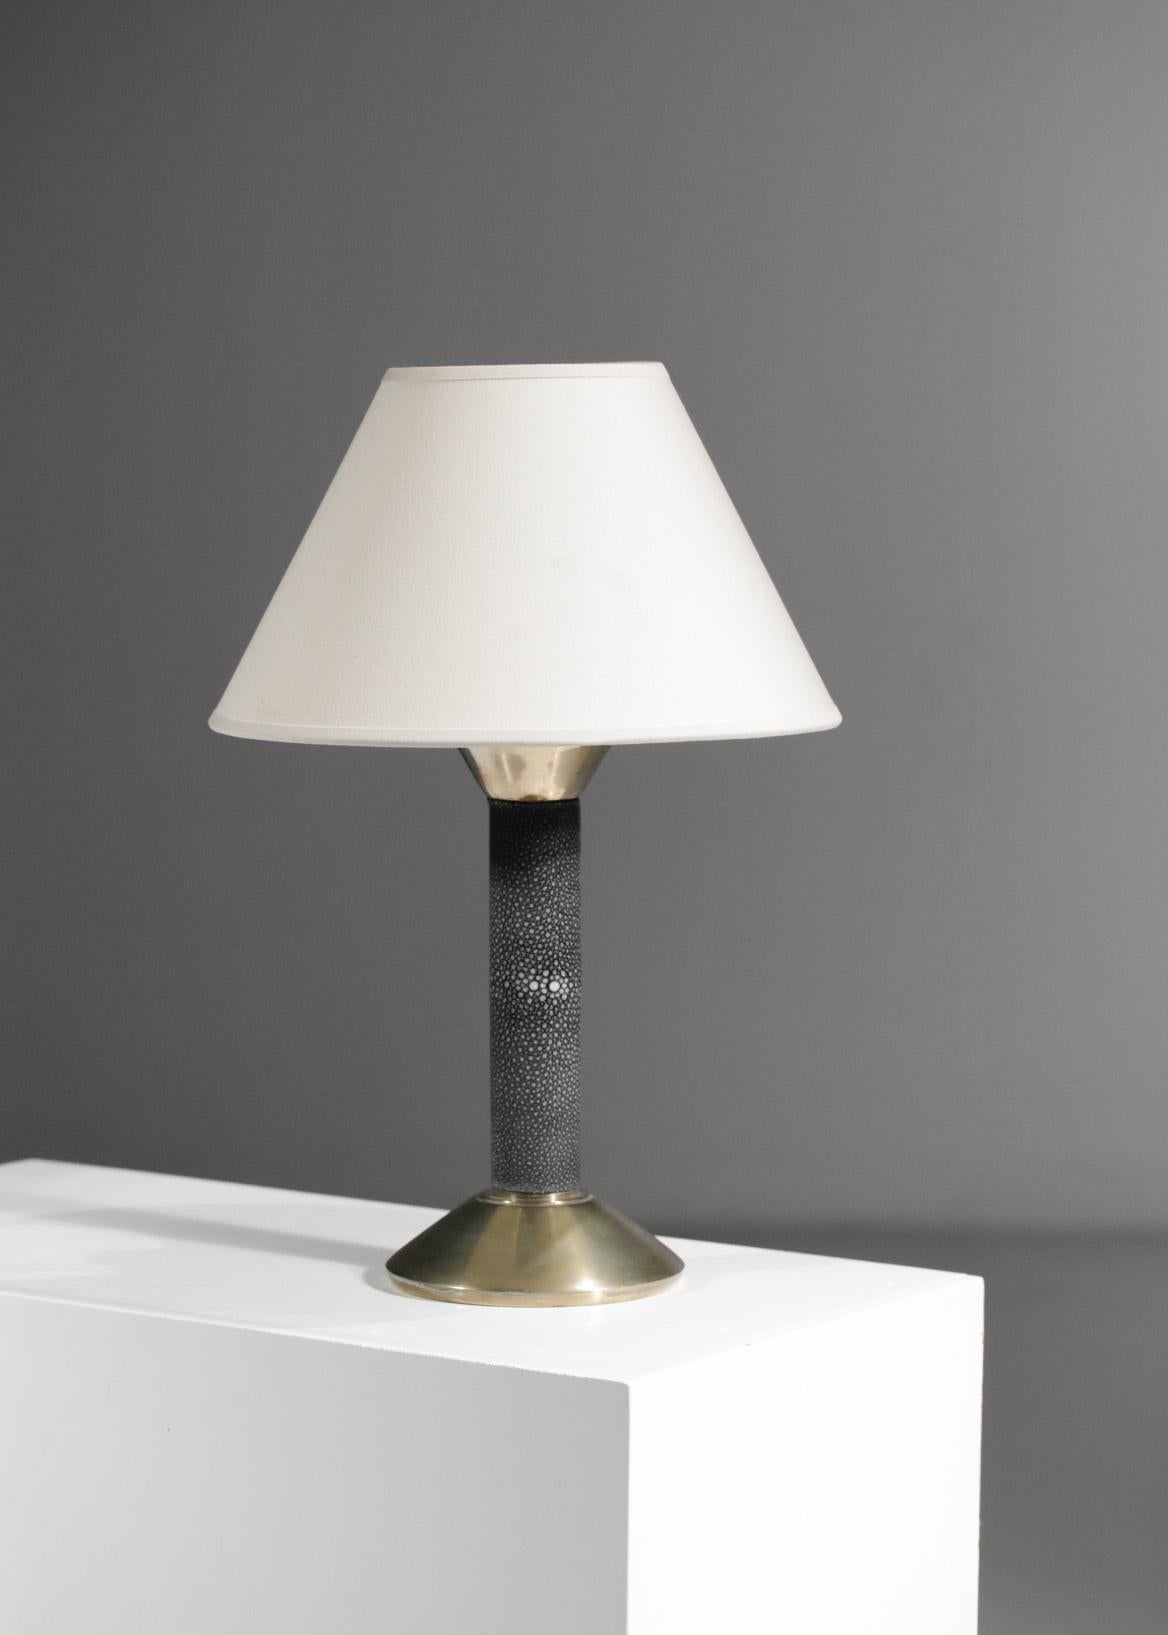 Art Deco Table Lamp in Stingray Attributed to André Groult Bronze 1940s - G082 For Sale 1